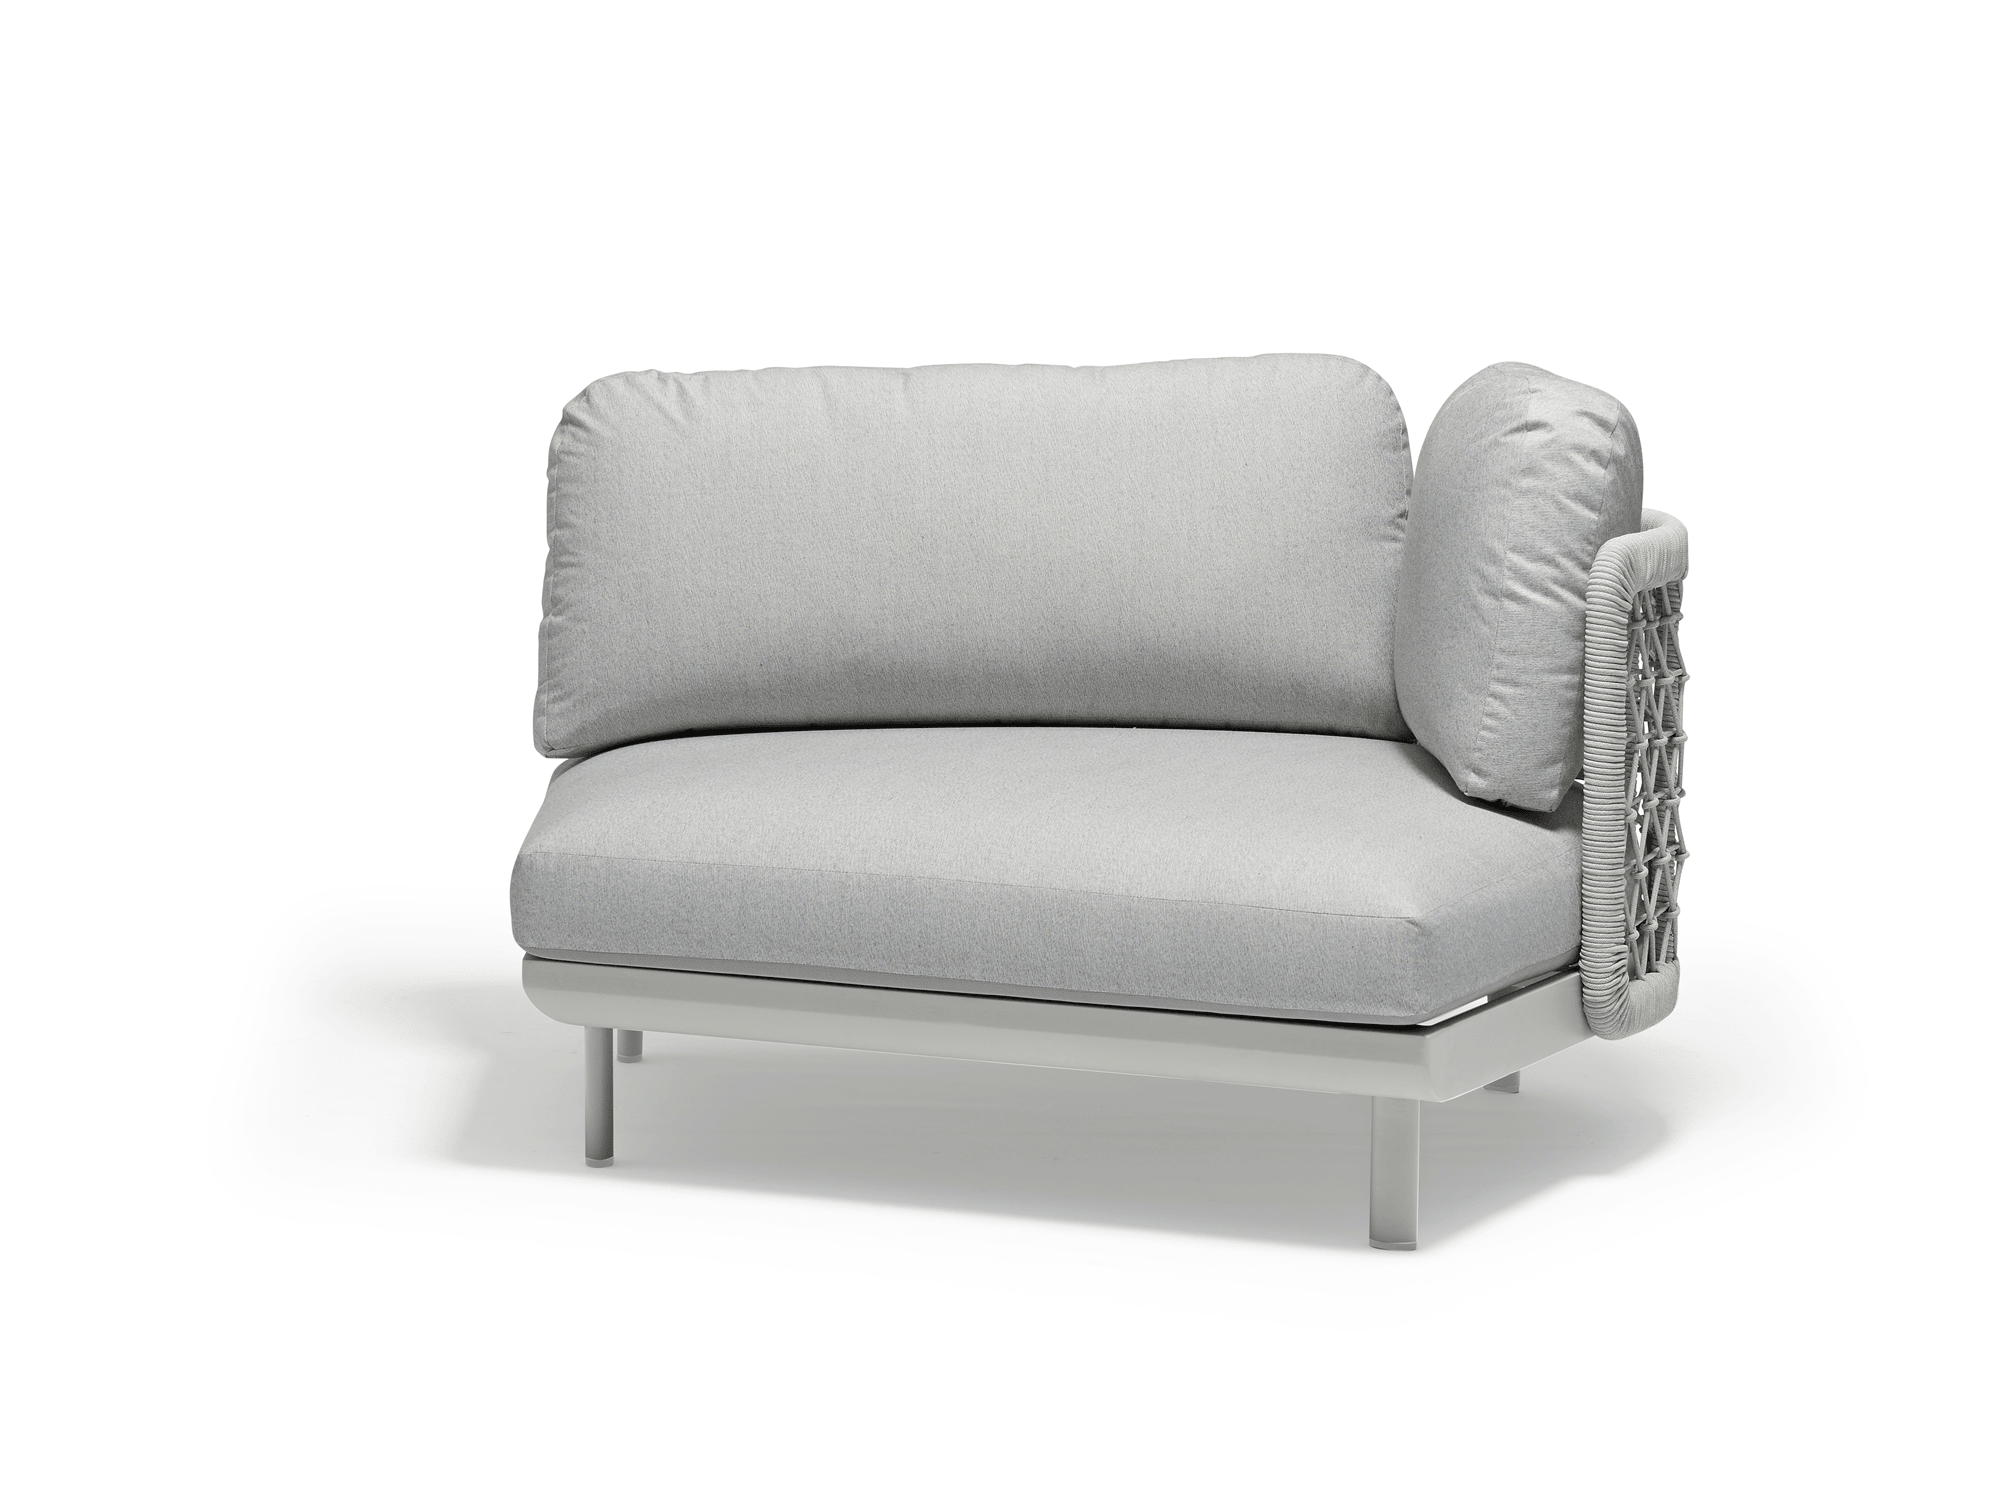 Amberly Curved Chair in Light Grey - Euro Living Furniture